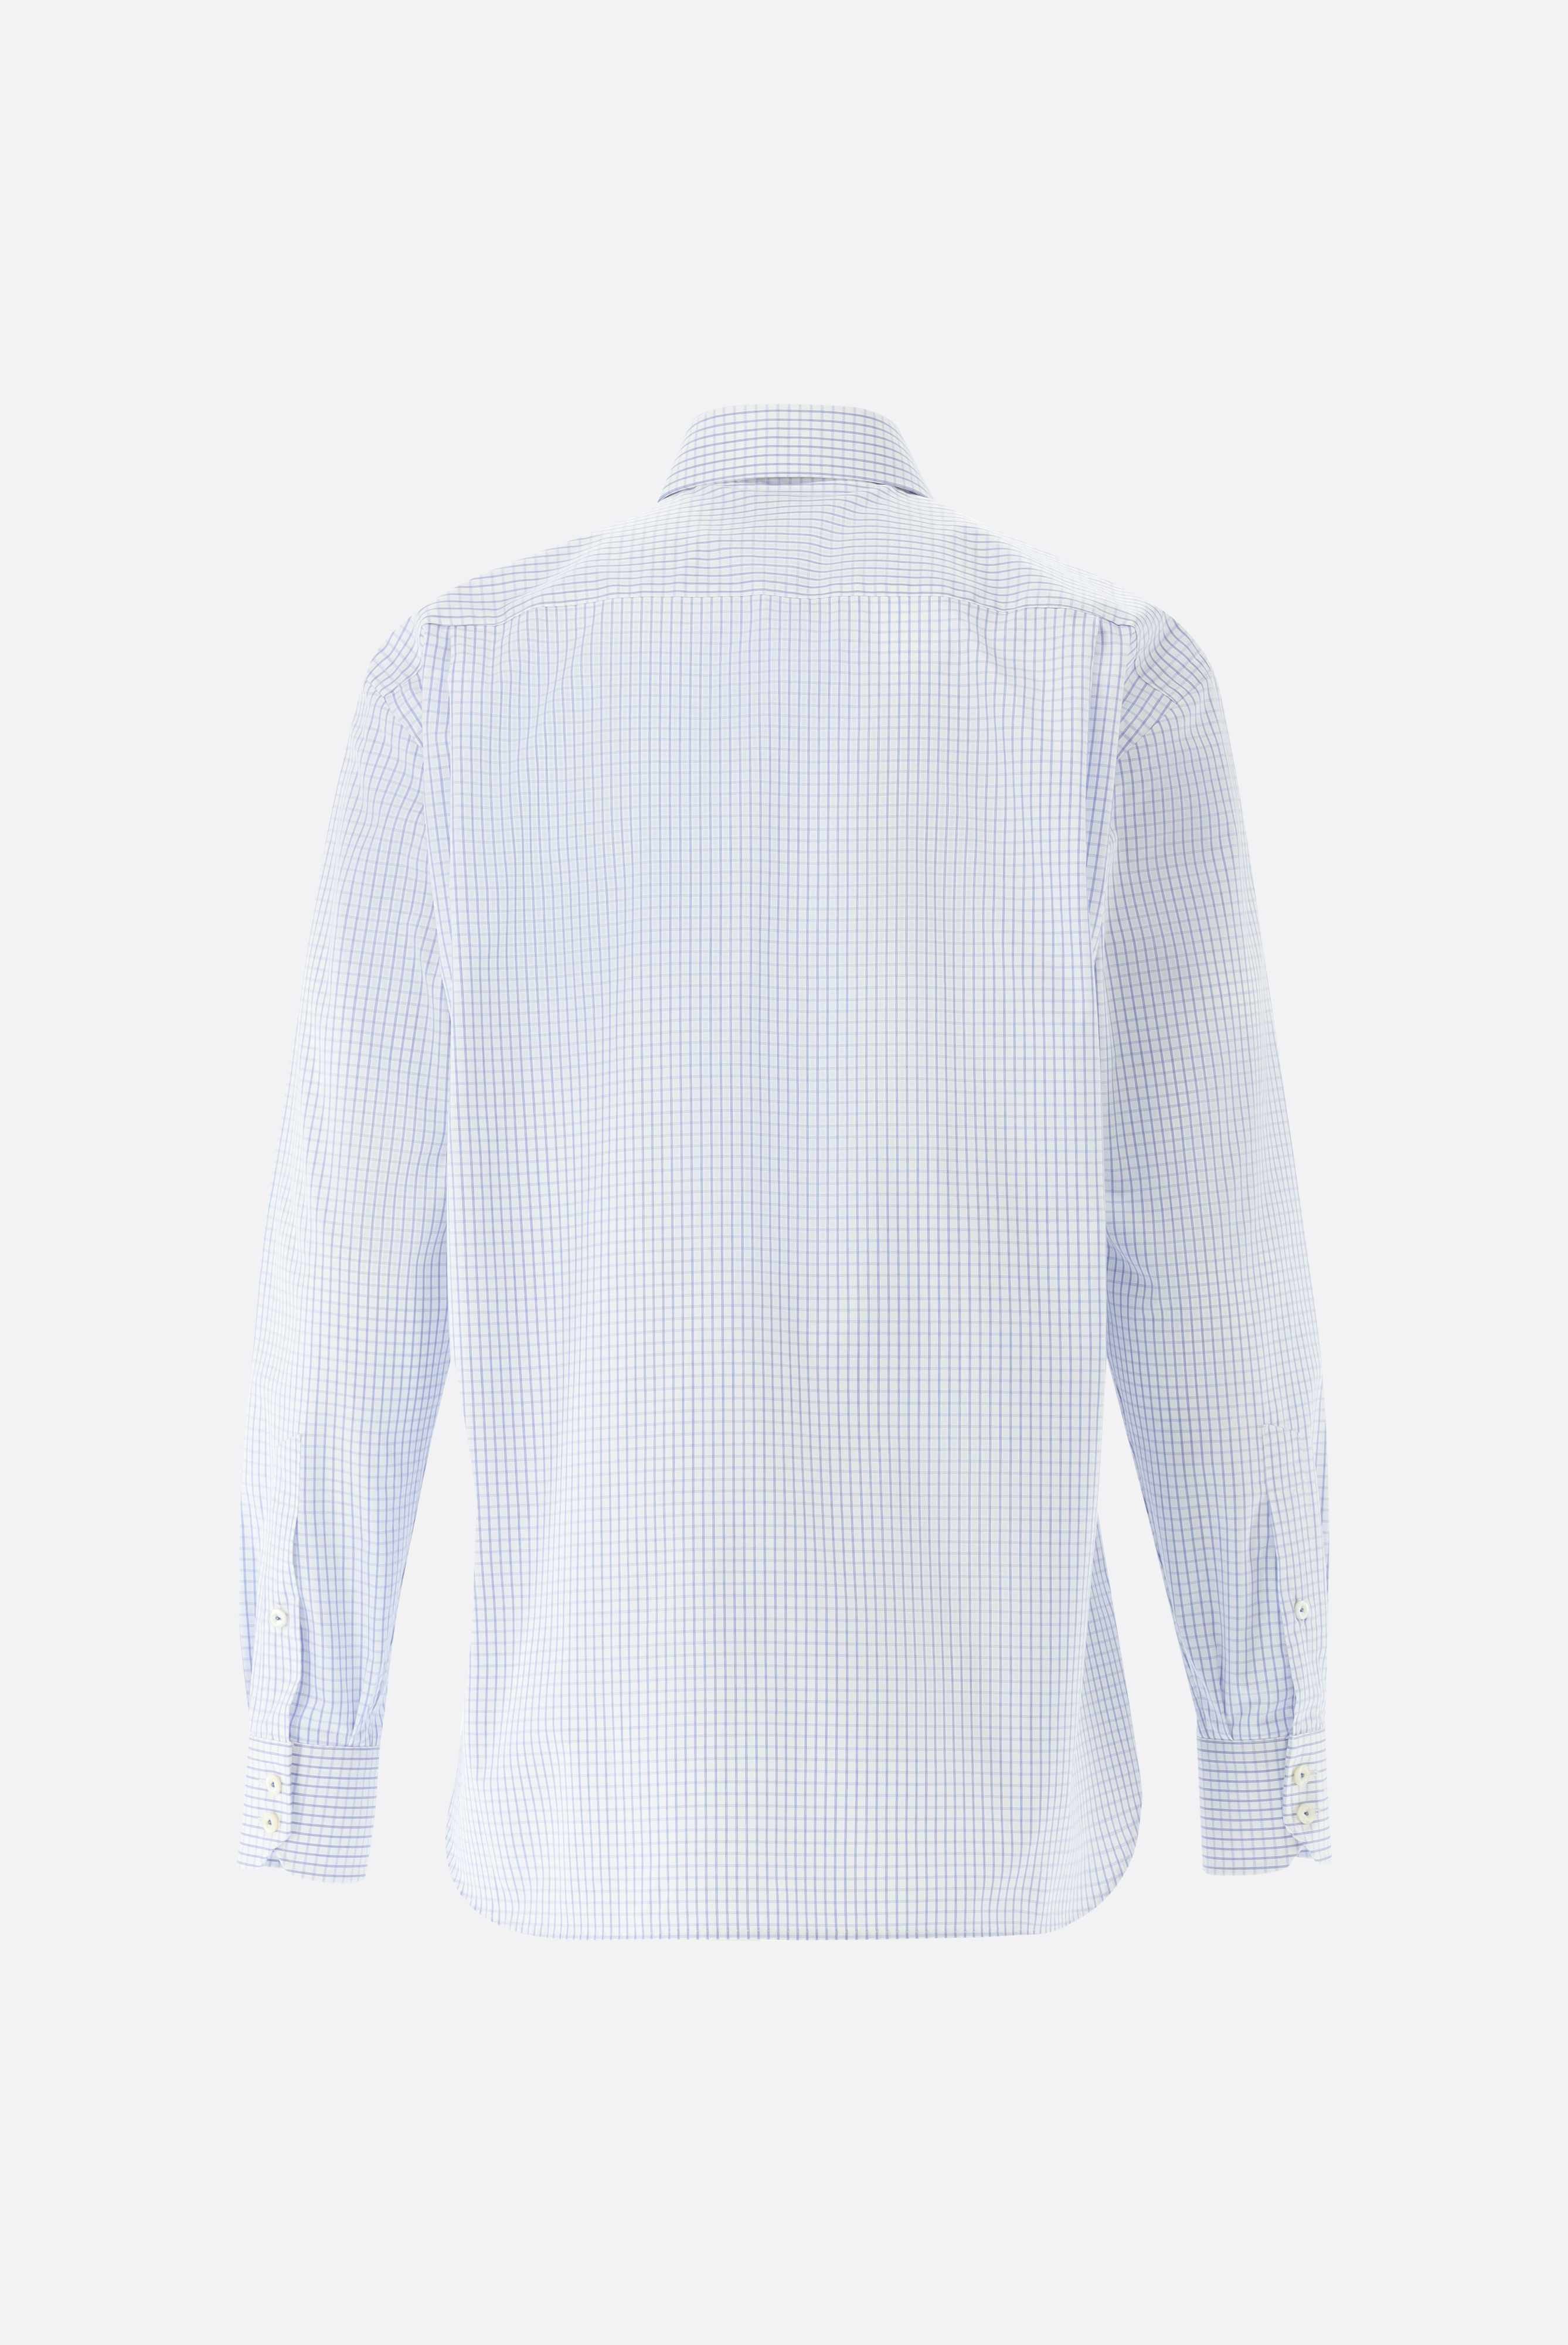 Business Shirts+Small-Checked Twill Business Shirt Comfort Fit+20.2021.AV.151046.730.39